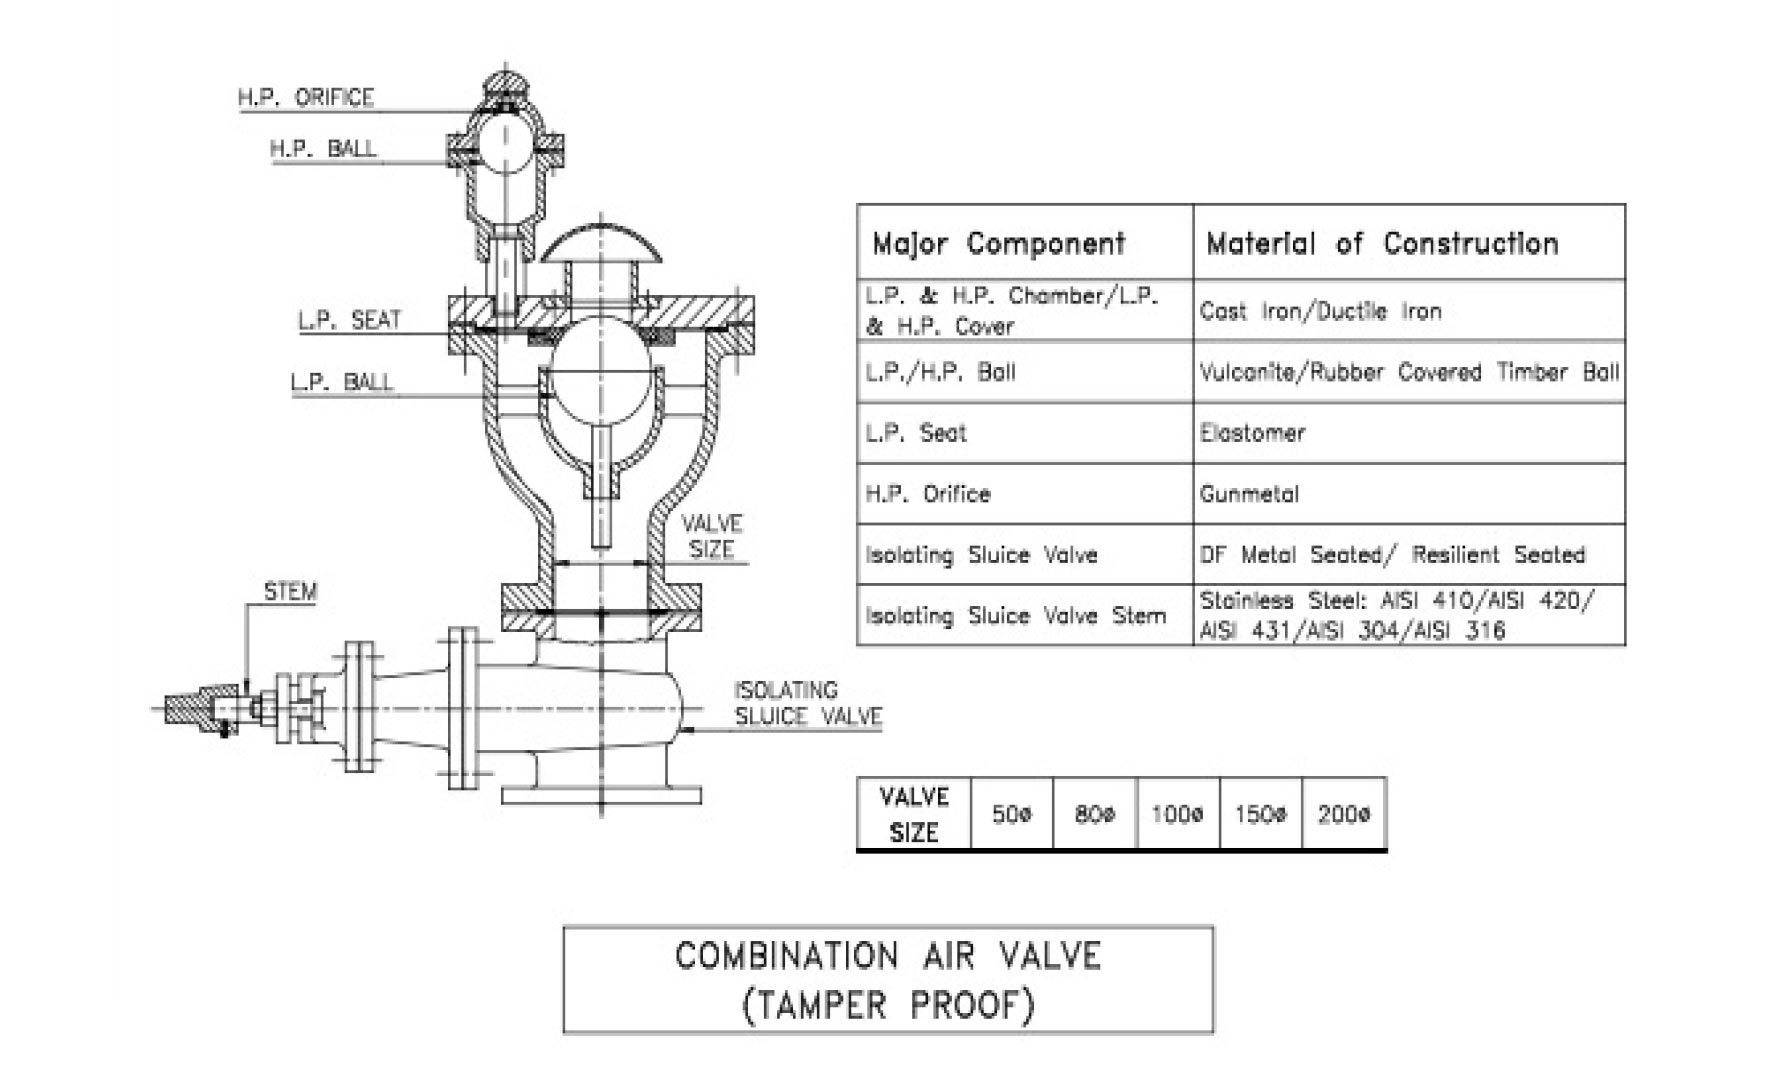 COMBINATION AIR VALVE (TAMPER PROOF)